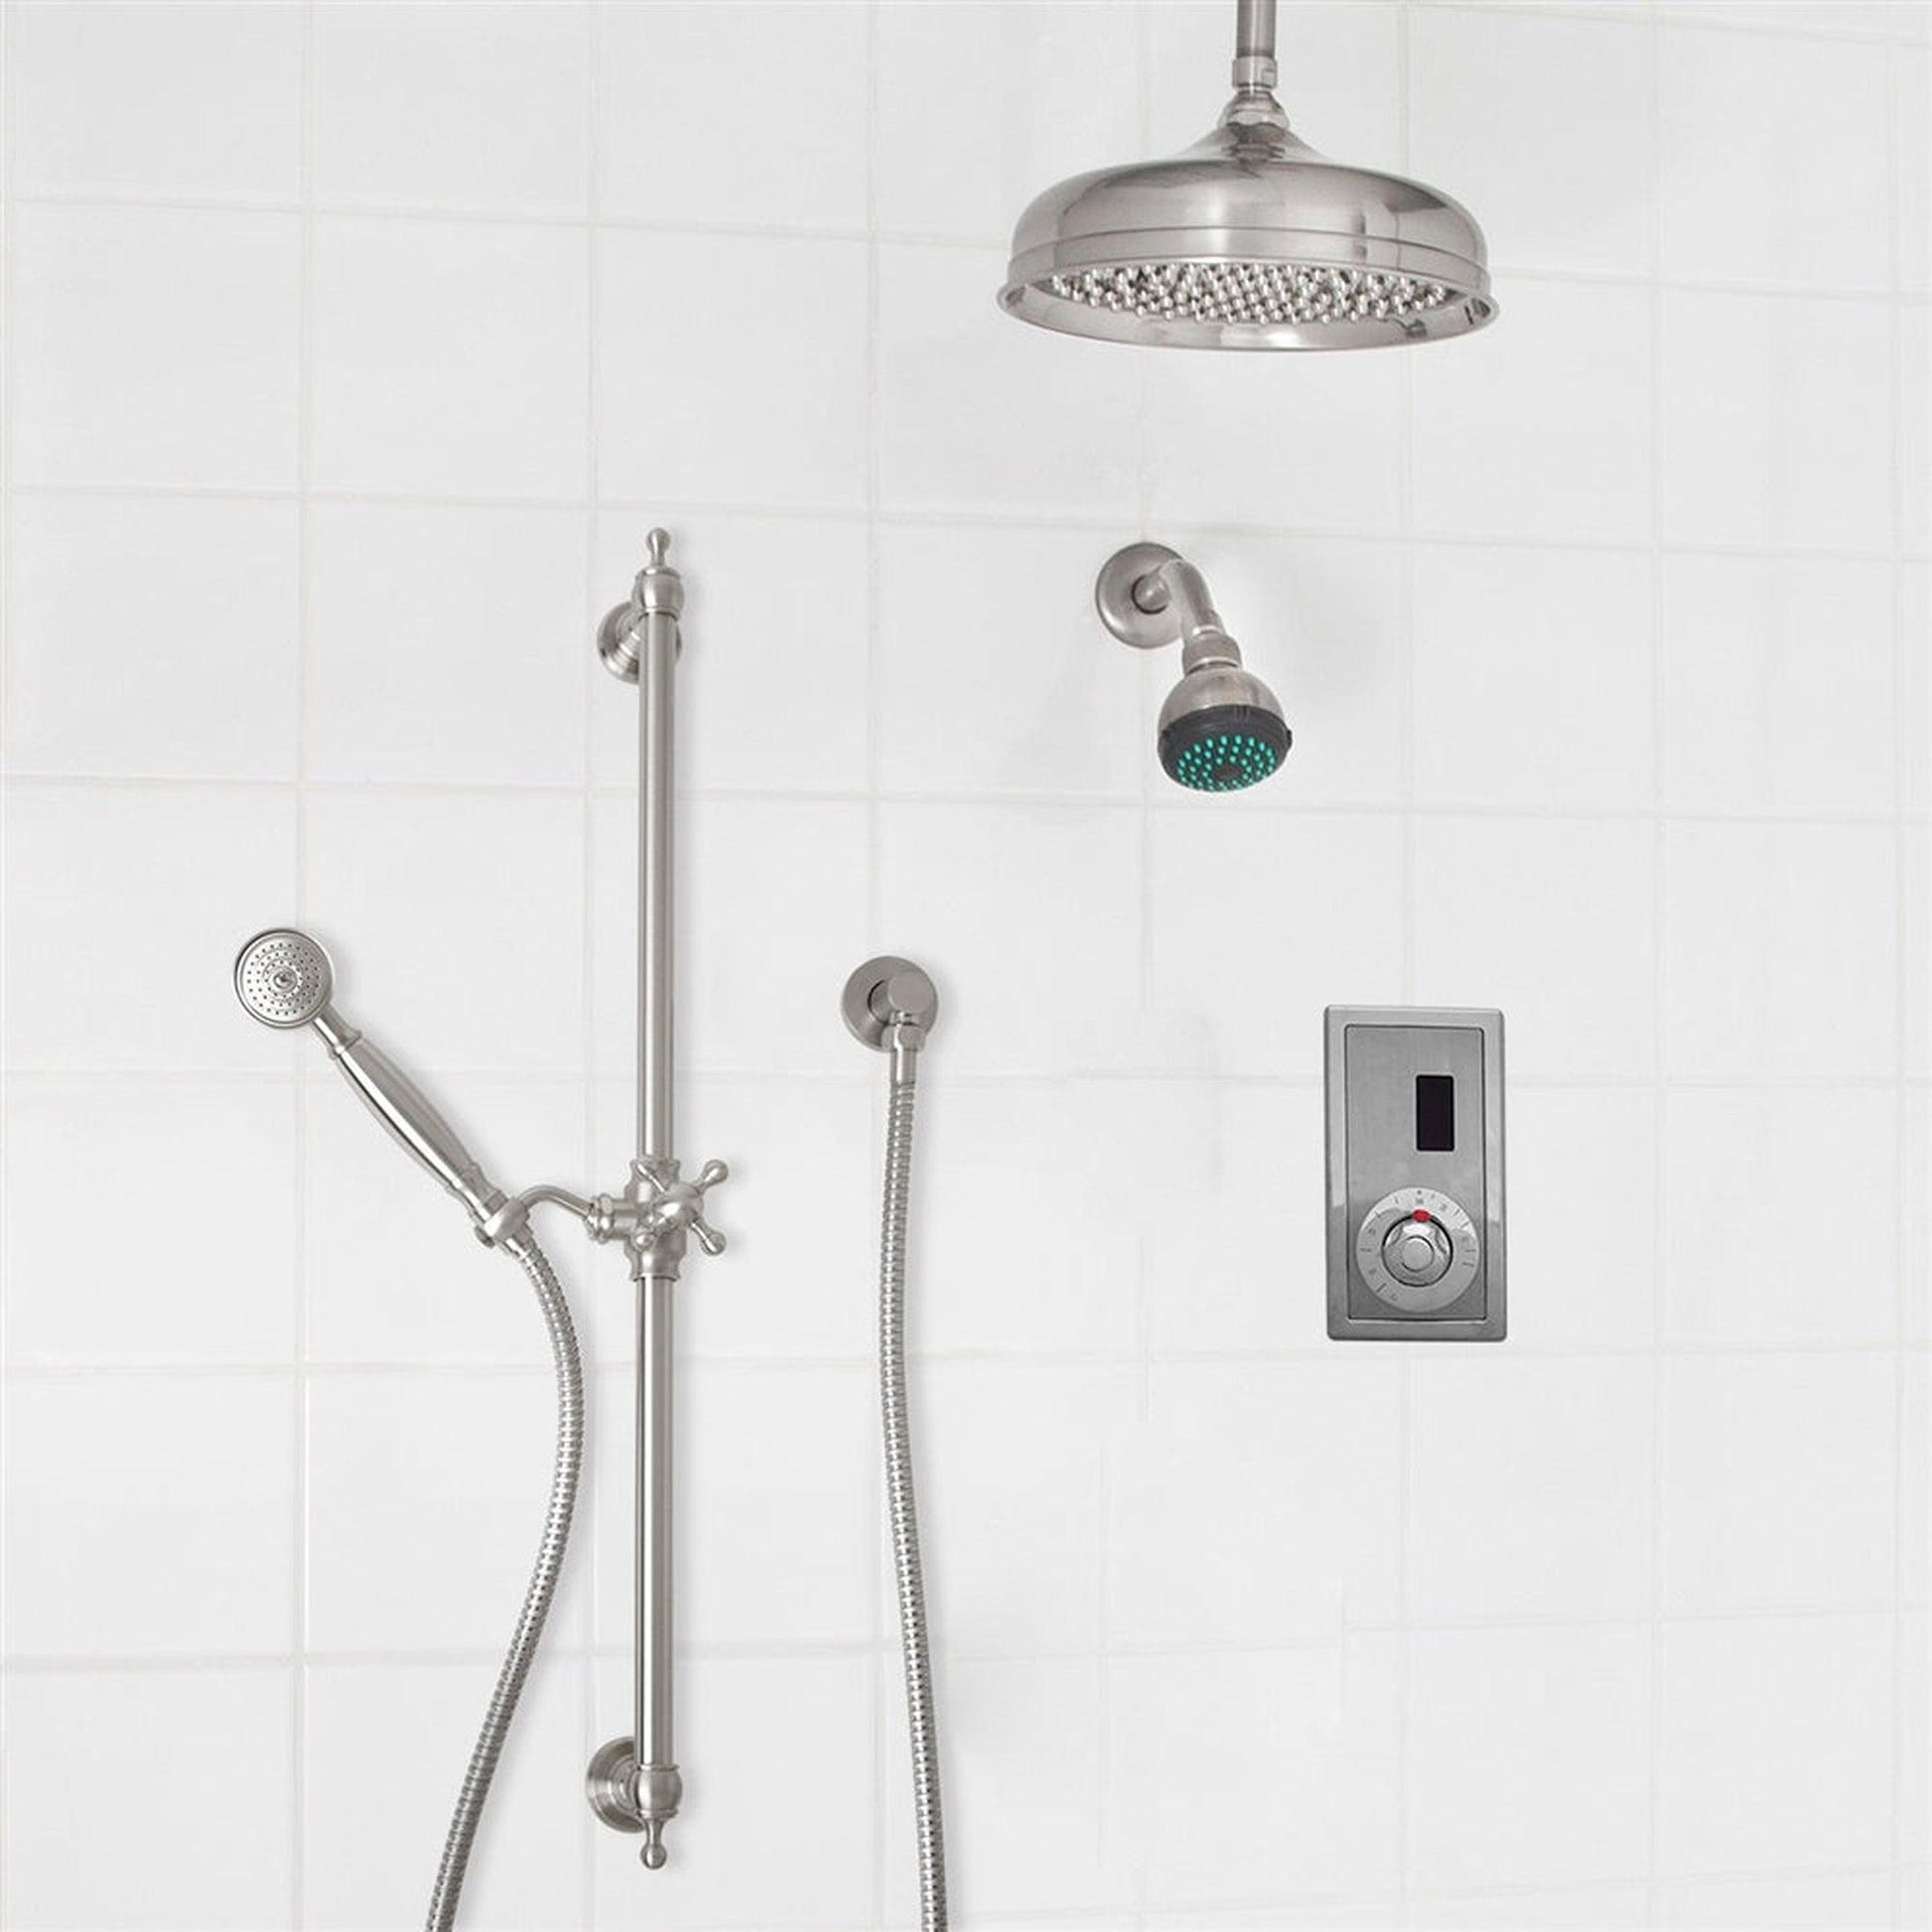 Fontana 16" Brushed Nickel Dual Shower Head Luxury Bathroom Automatic Thermostatic Sensor Temperature Dial Shower System With Hand Shower